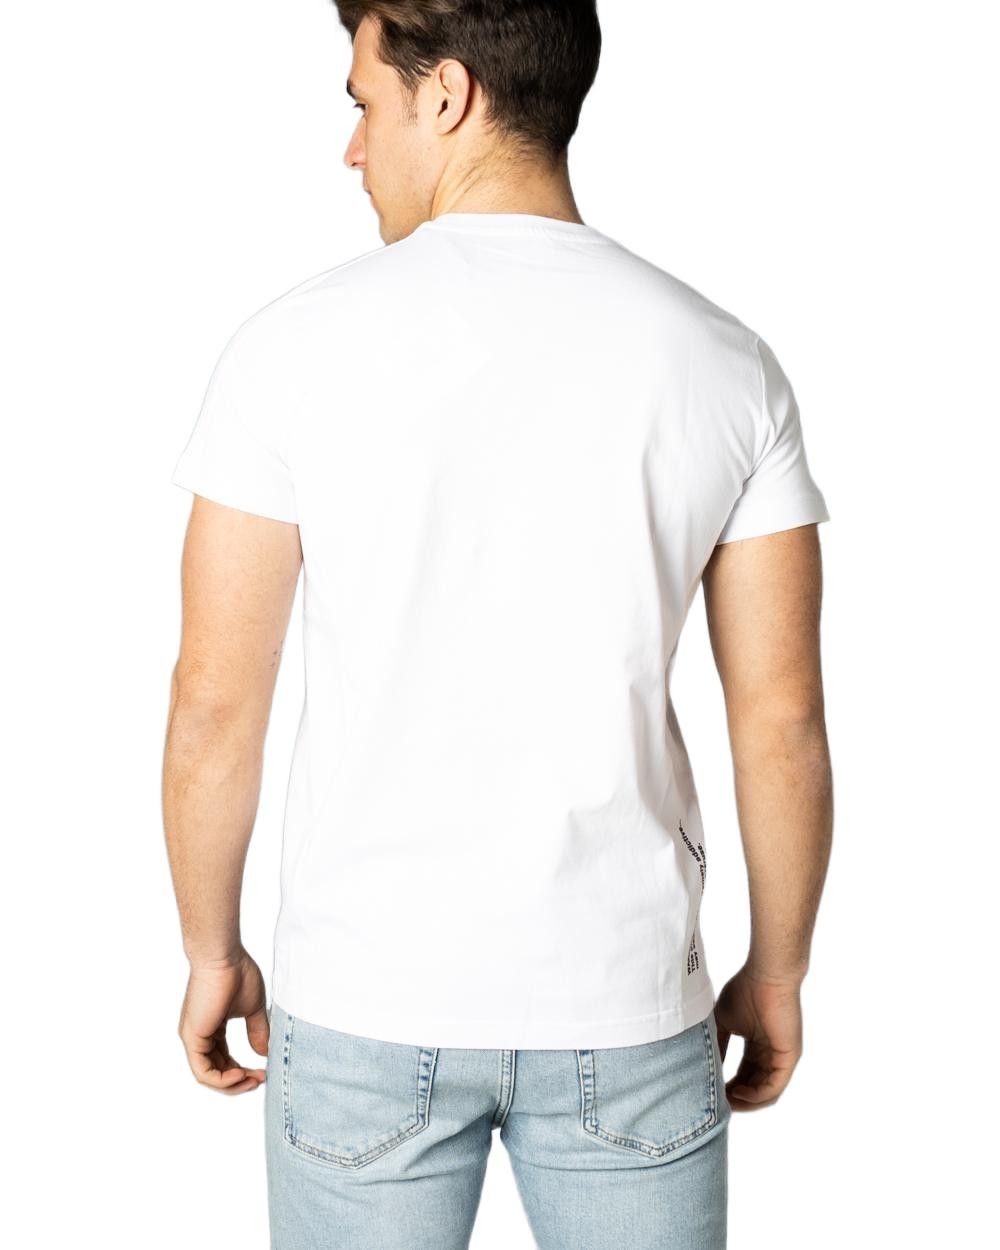 Brand: Diesel Gender: Men Type: T-shirts Season: Spring/Summer  PRODUCT DETAIL • Color: white • Pattern: print • Fastening: slip on • Sleeves: short • Neckline: round neck  COMPOSITION AND MATERIAL • Composition: -100% cotton  •  Washing: machine wash at 30°